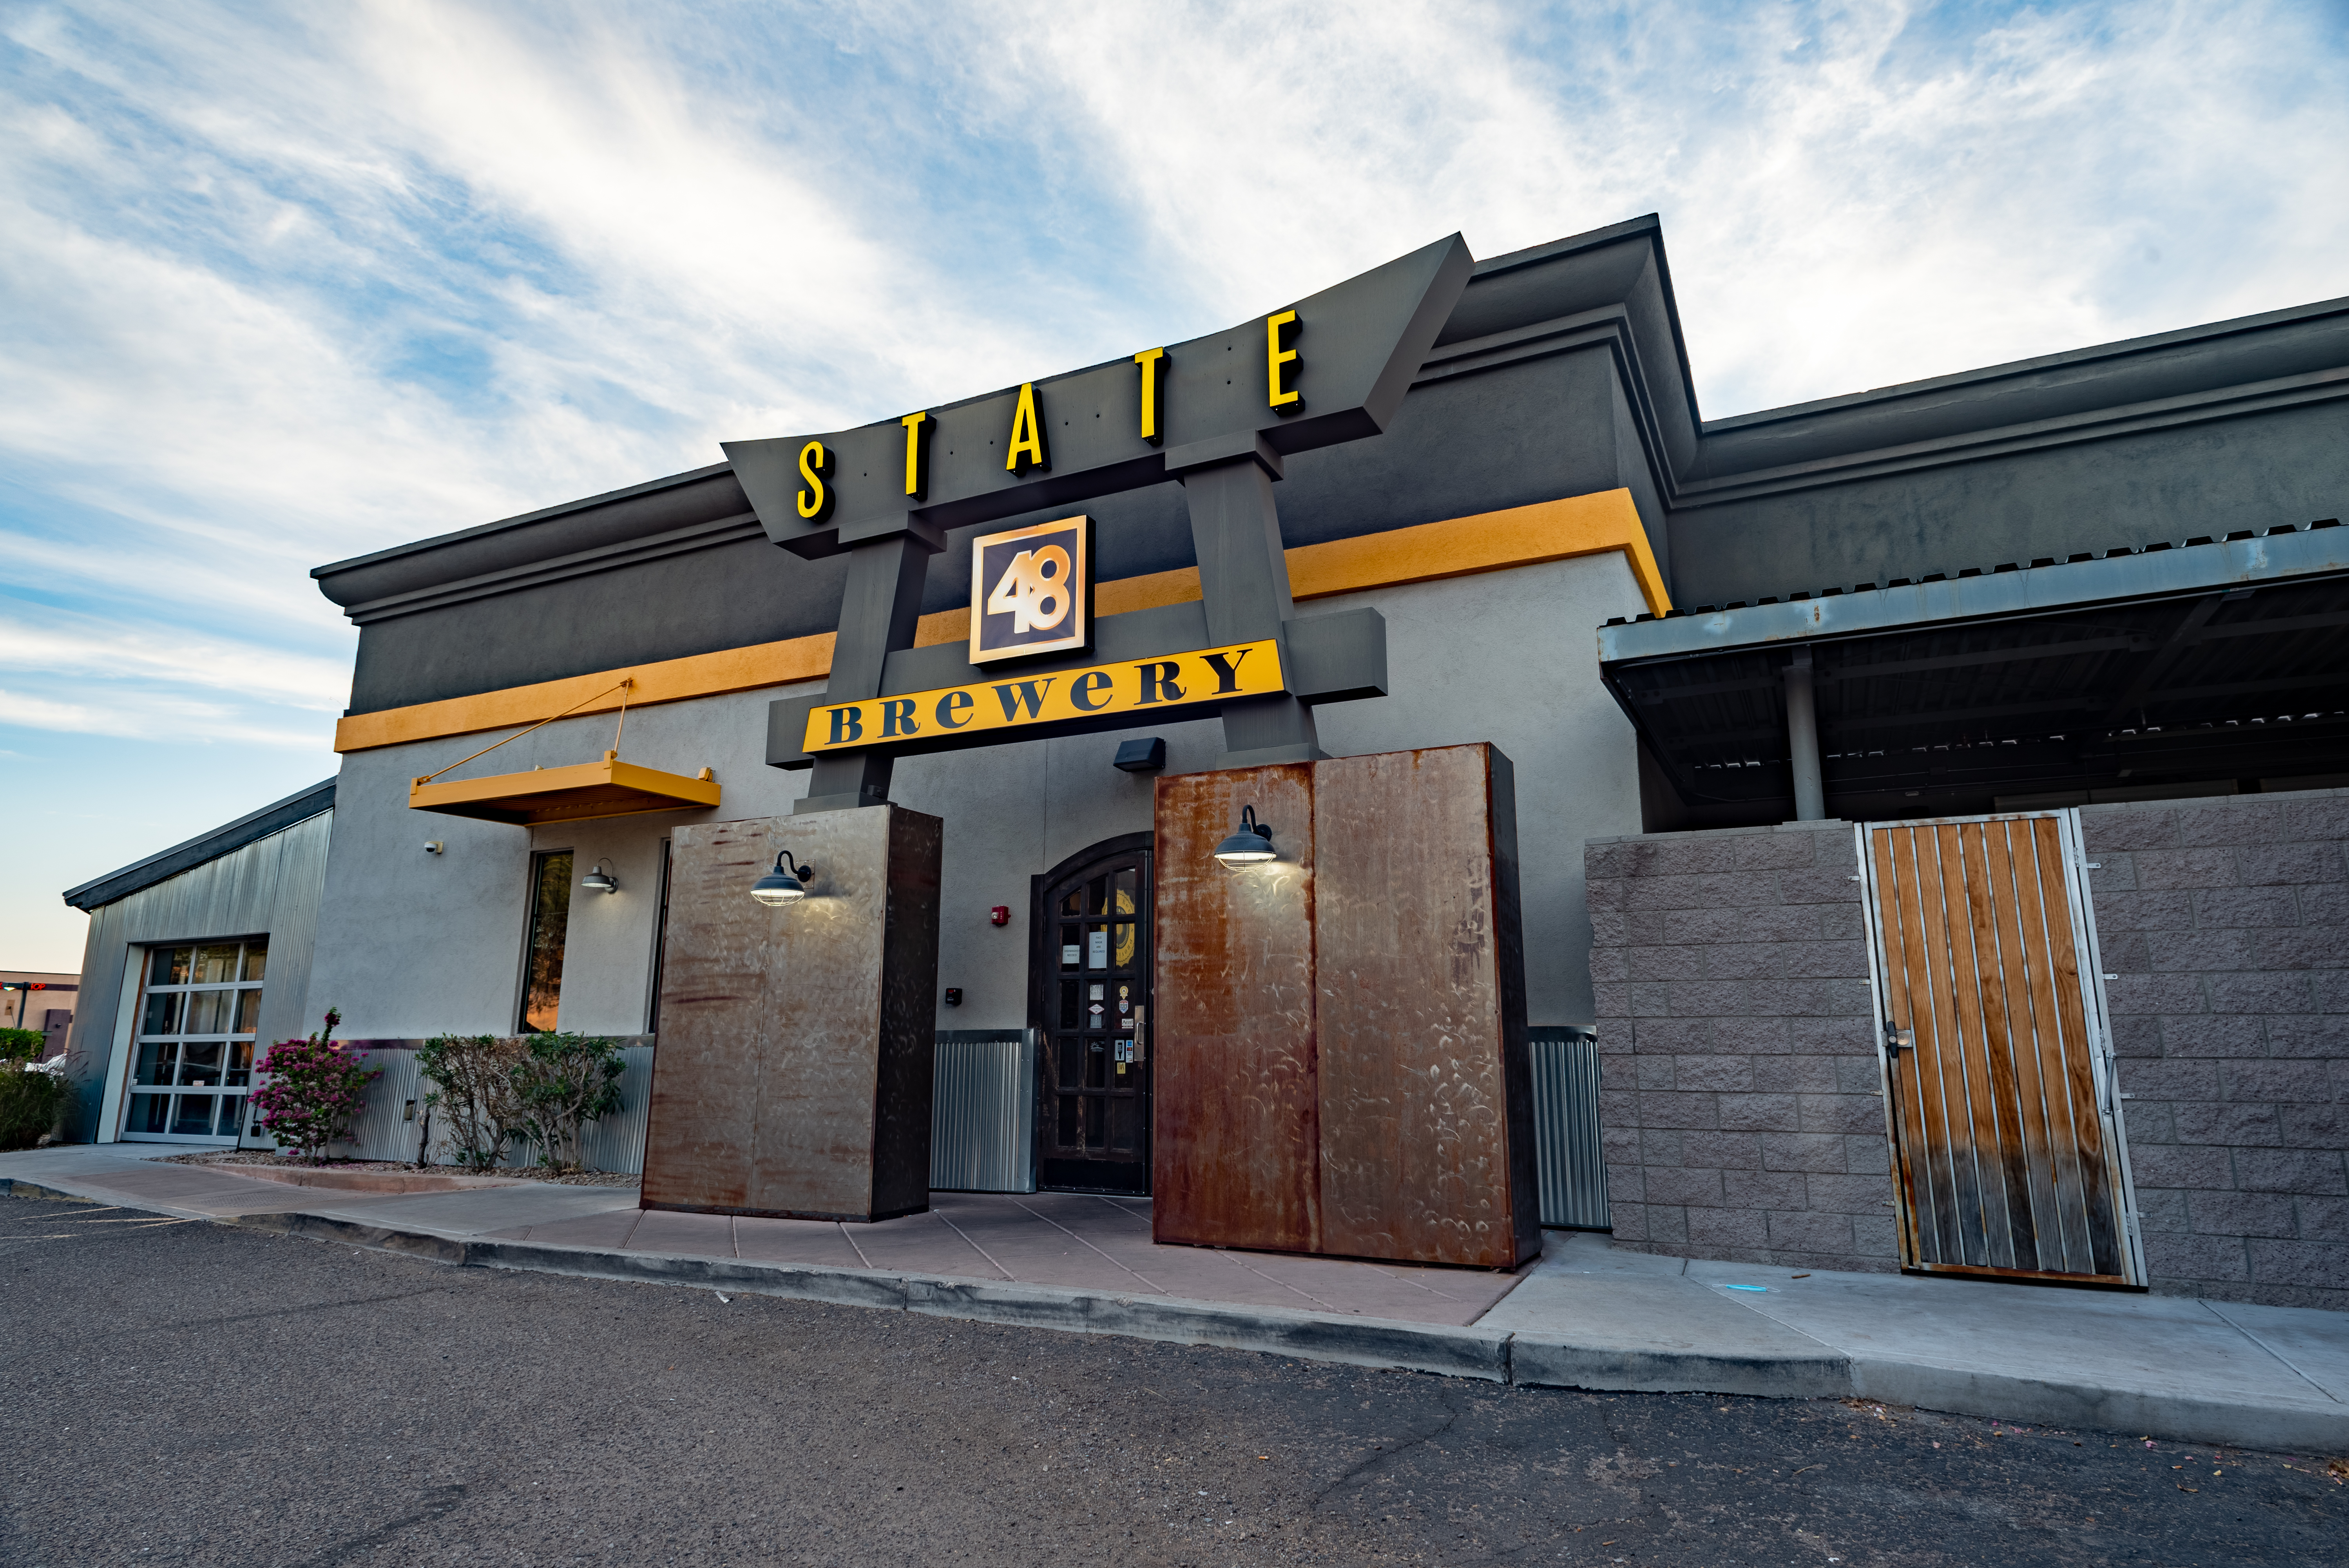 STATE 48 BREWERY DTPHX, Phoenix - Central City - Photos & Restaurant  Reviews - Order Online Food Delivery - Tripadvisor